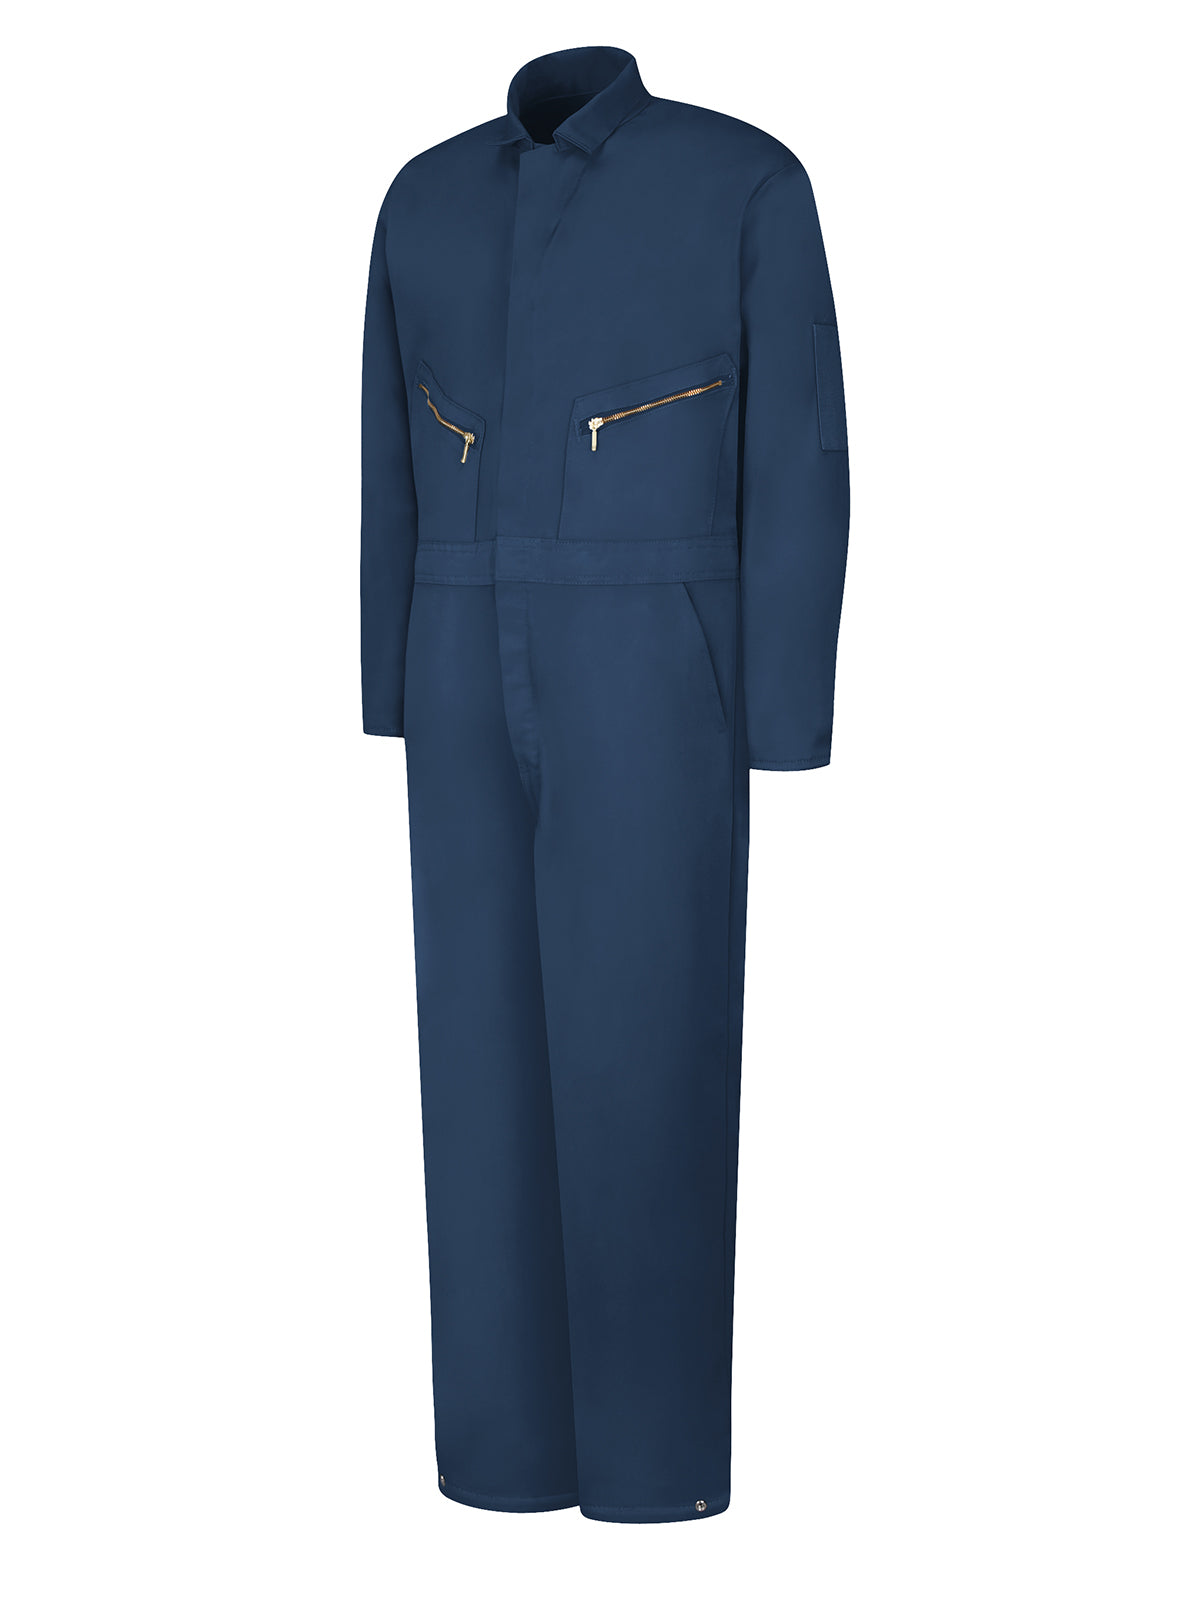 Men's Insulated Coverall - CT30 - Navy